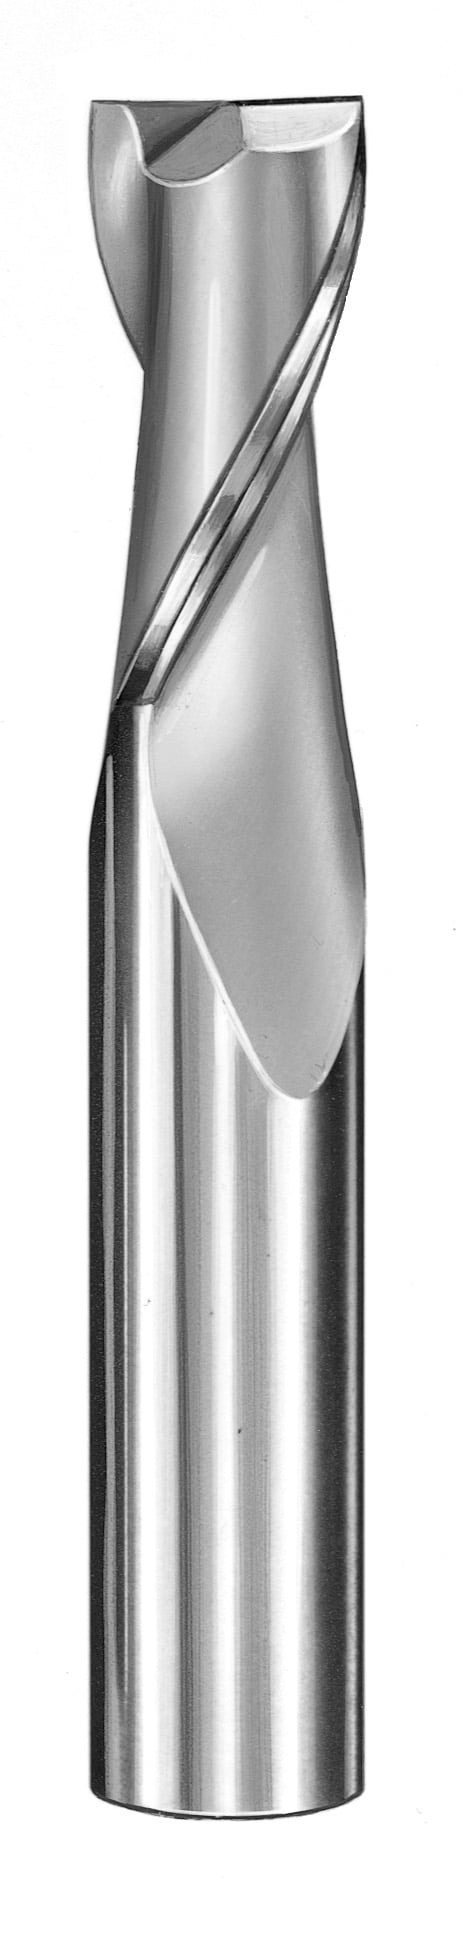 3/4" Dia, 2 Flute, Square End End Mill - 30371